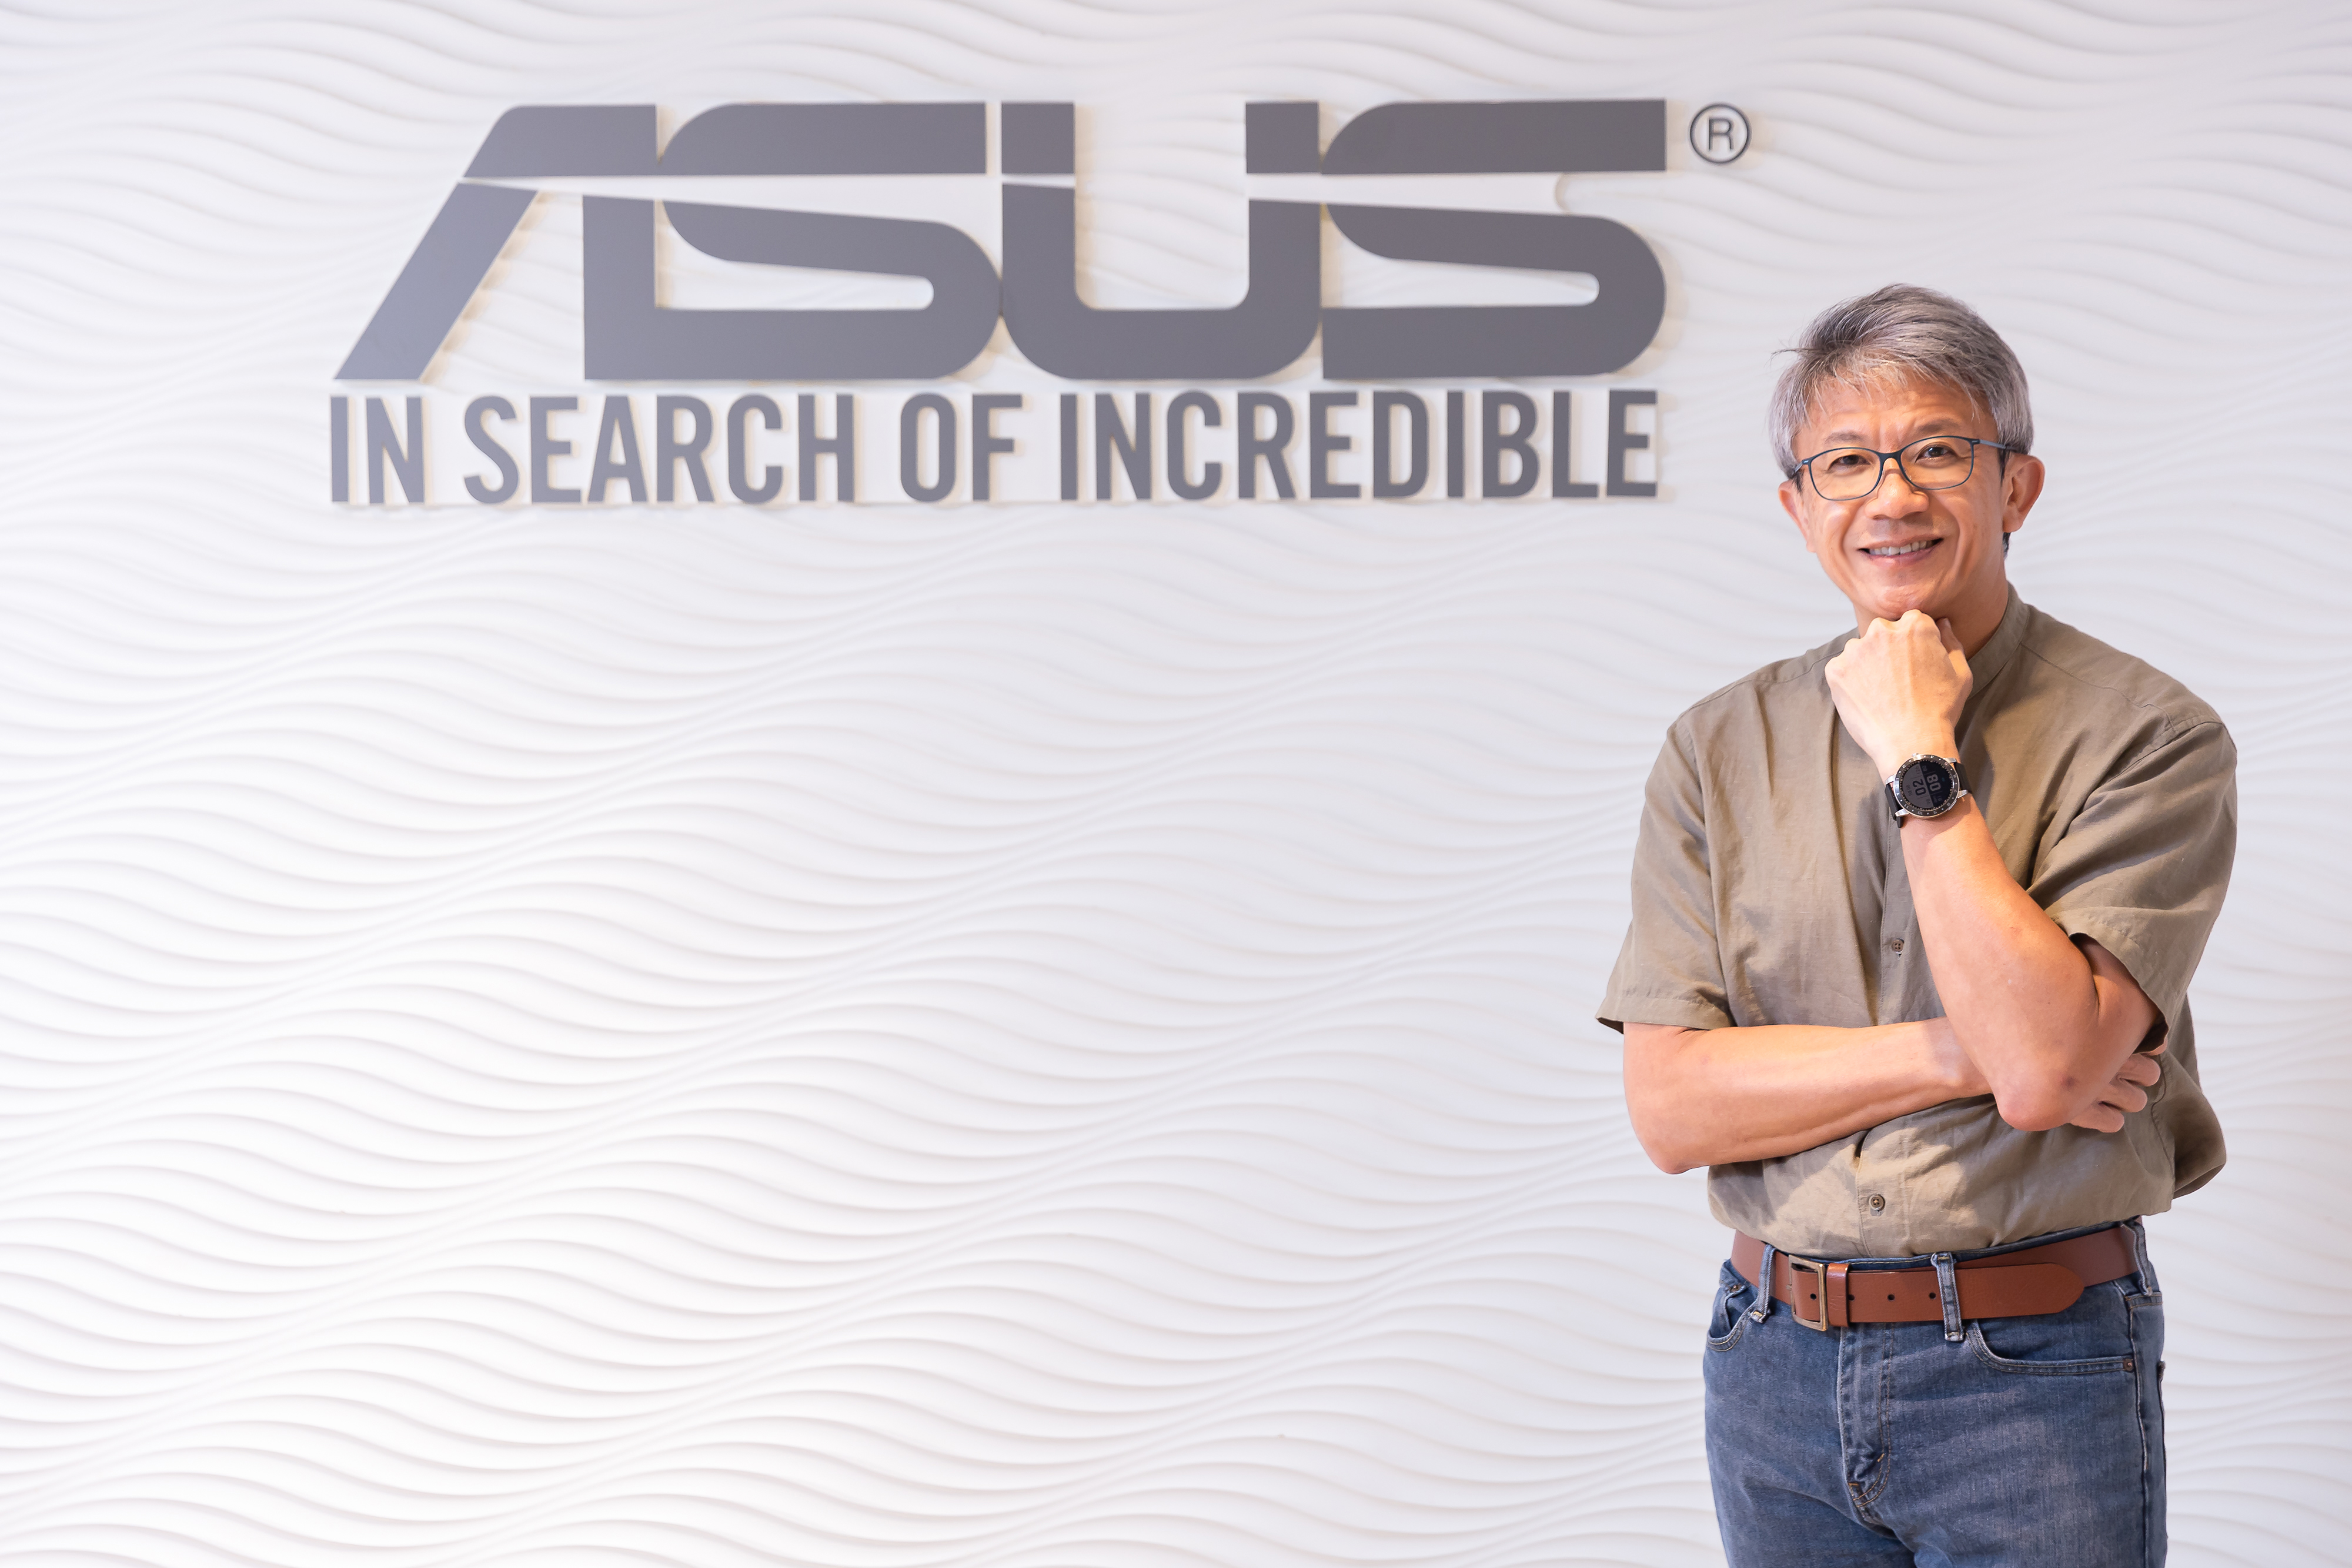 ASUS COO and SVP Joe Hsieh is wearing VivoWatch and standing in front of ASUS logo wall to present the watch in confidence 